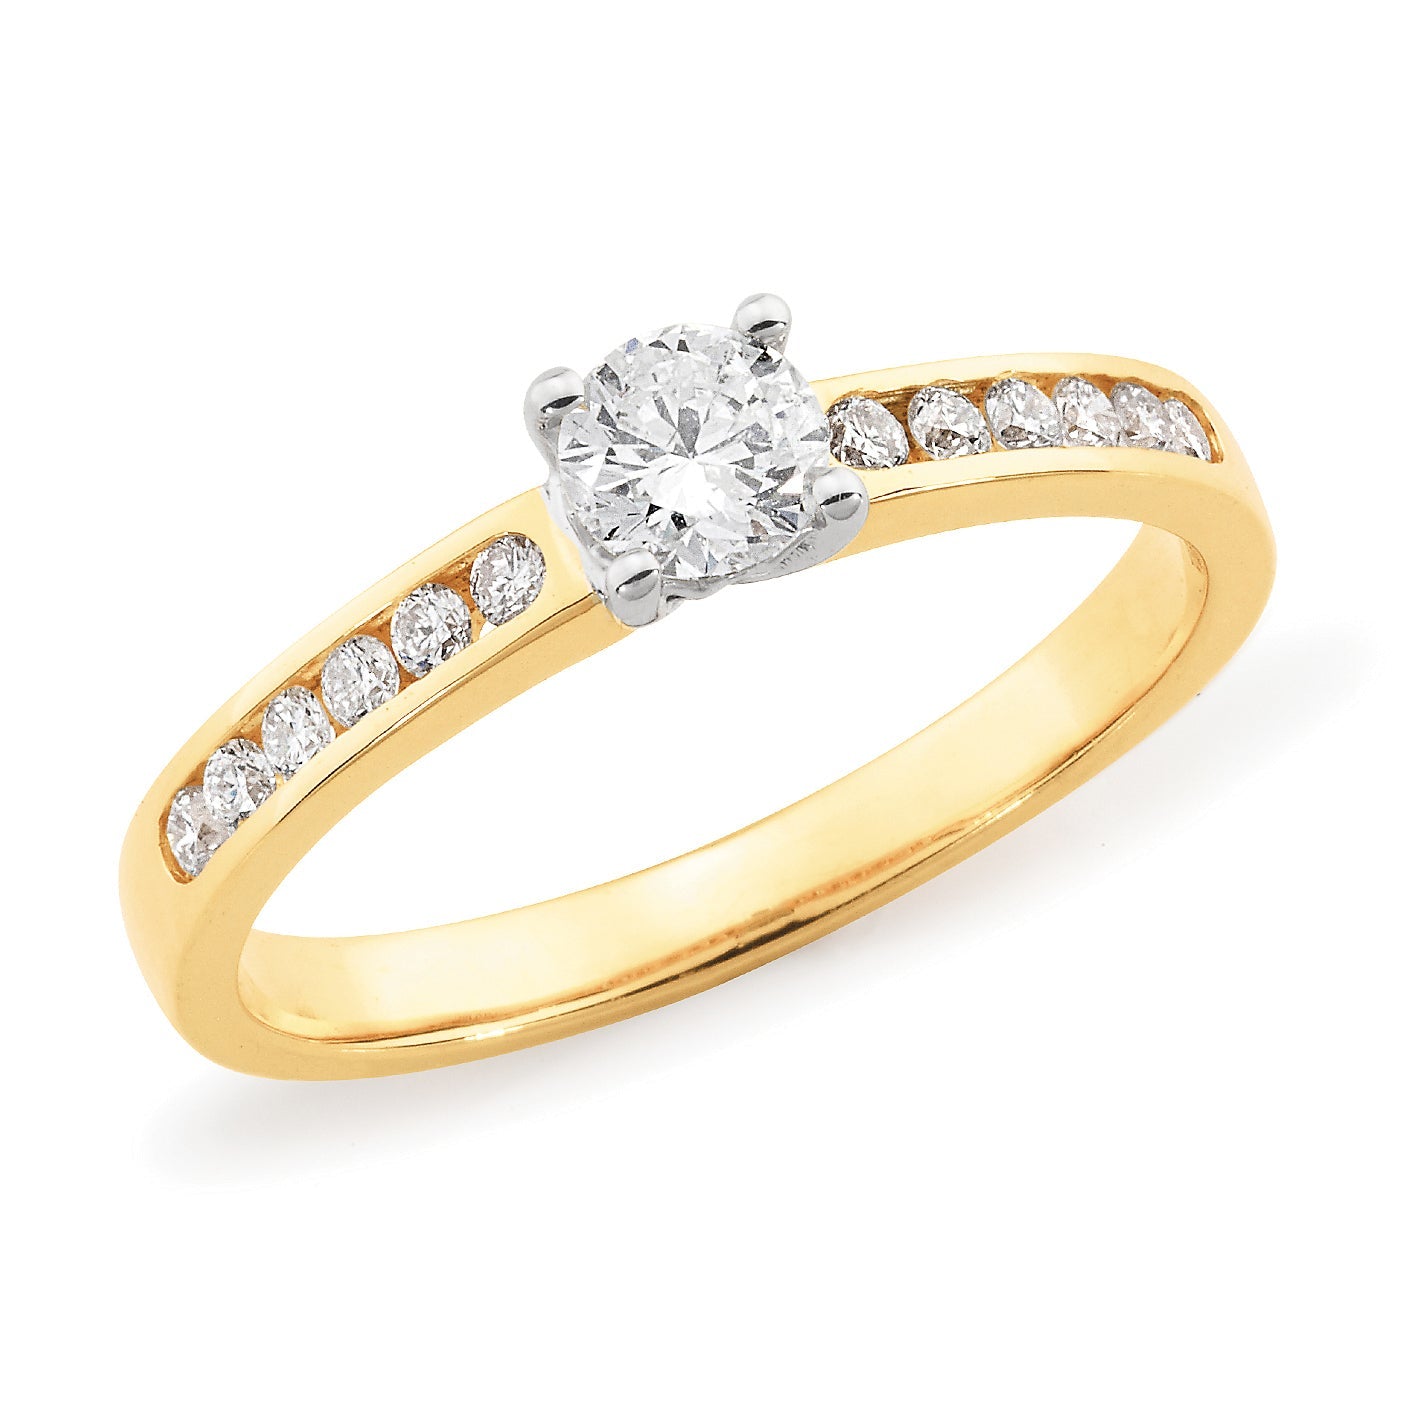 Diamond Set 4 Claw Engagement Ring in 18ct Yellow & White Gold